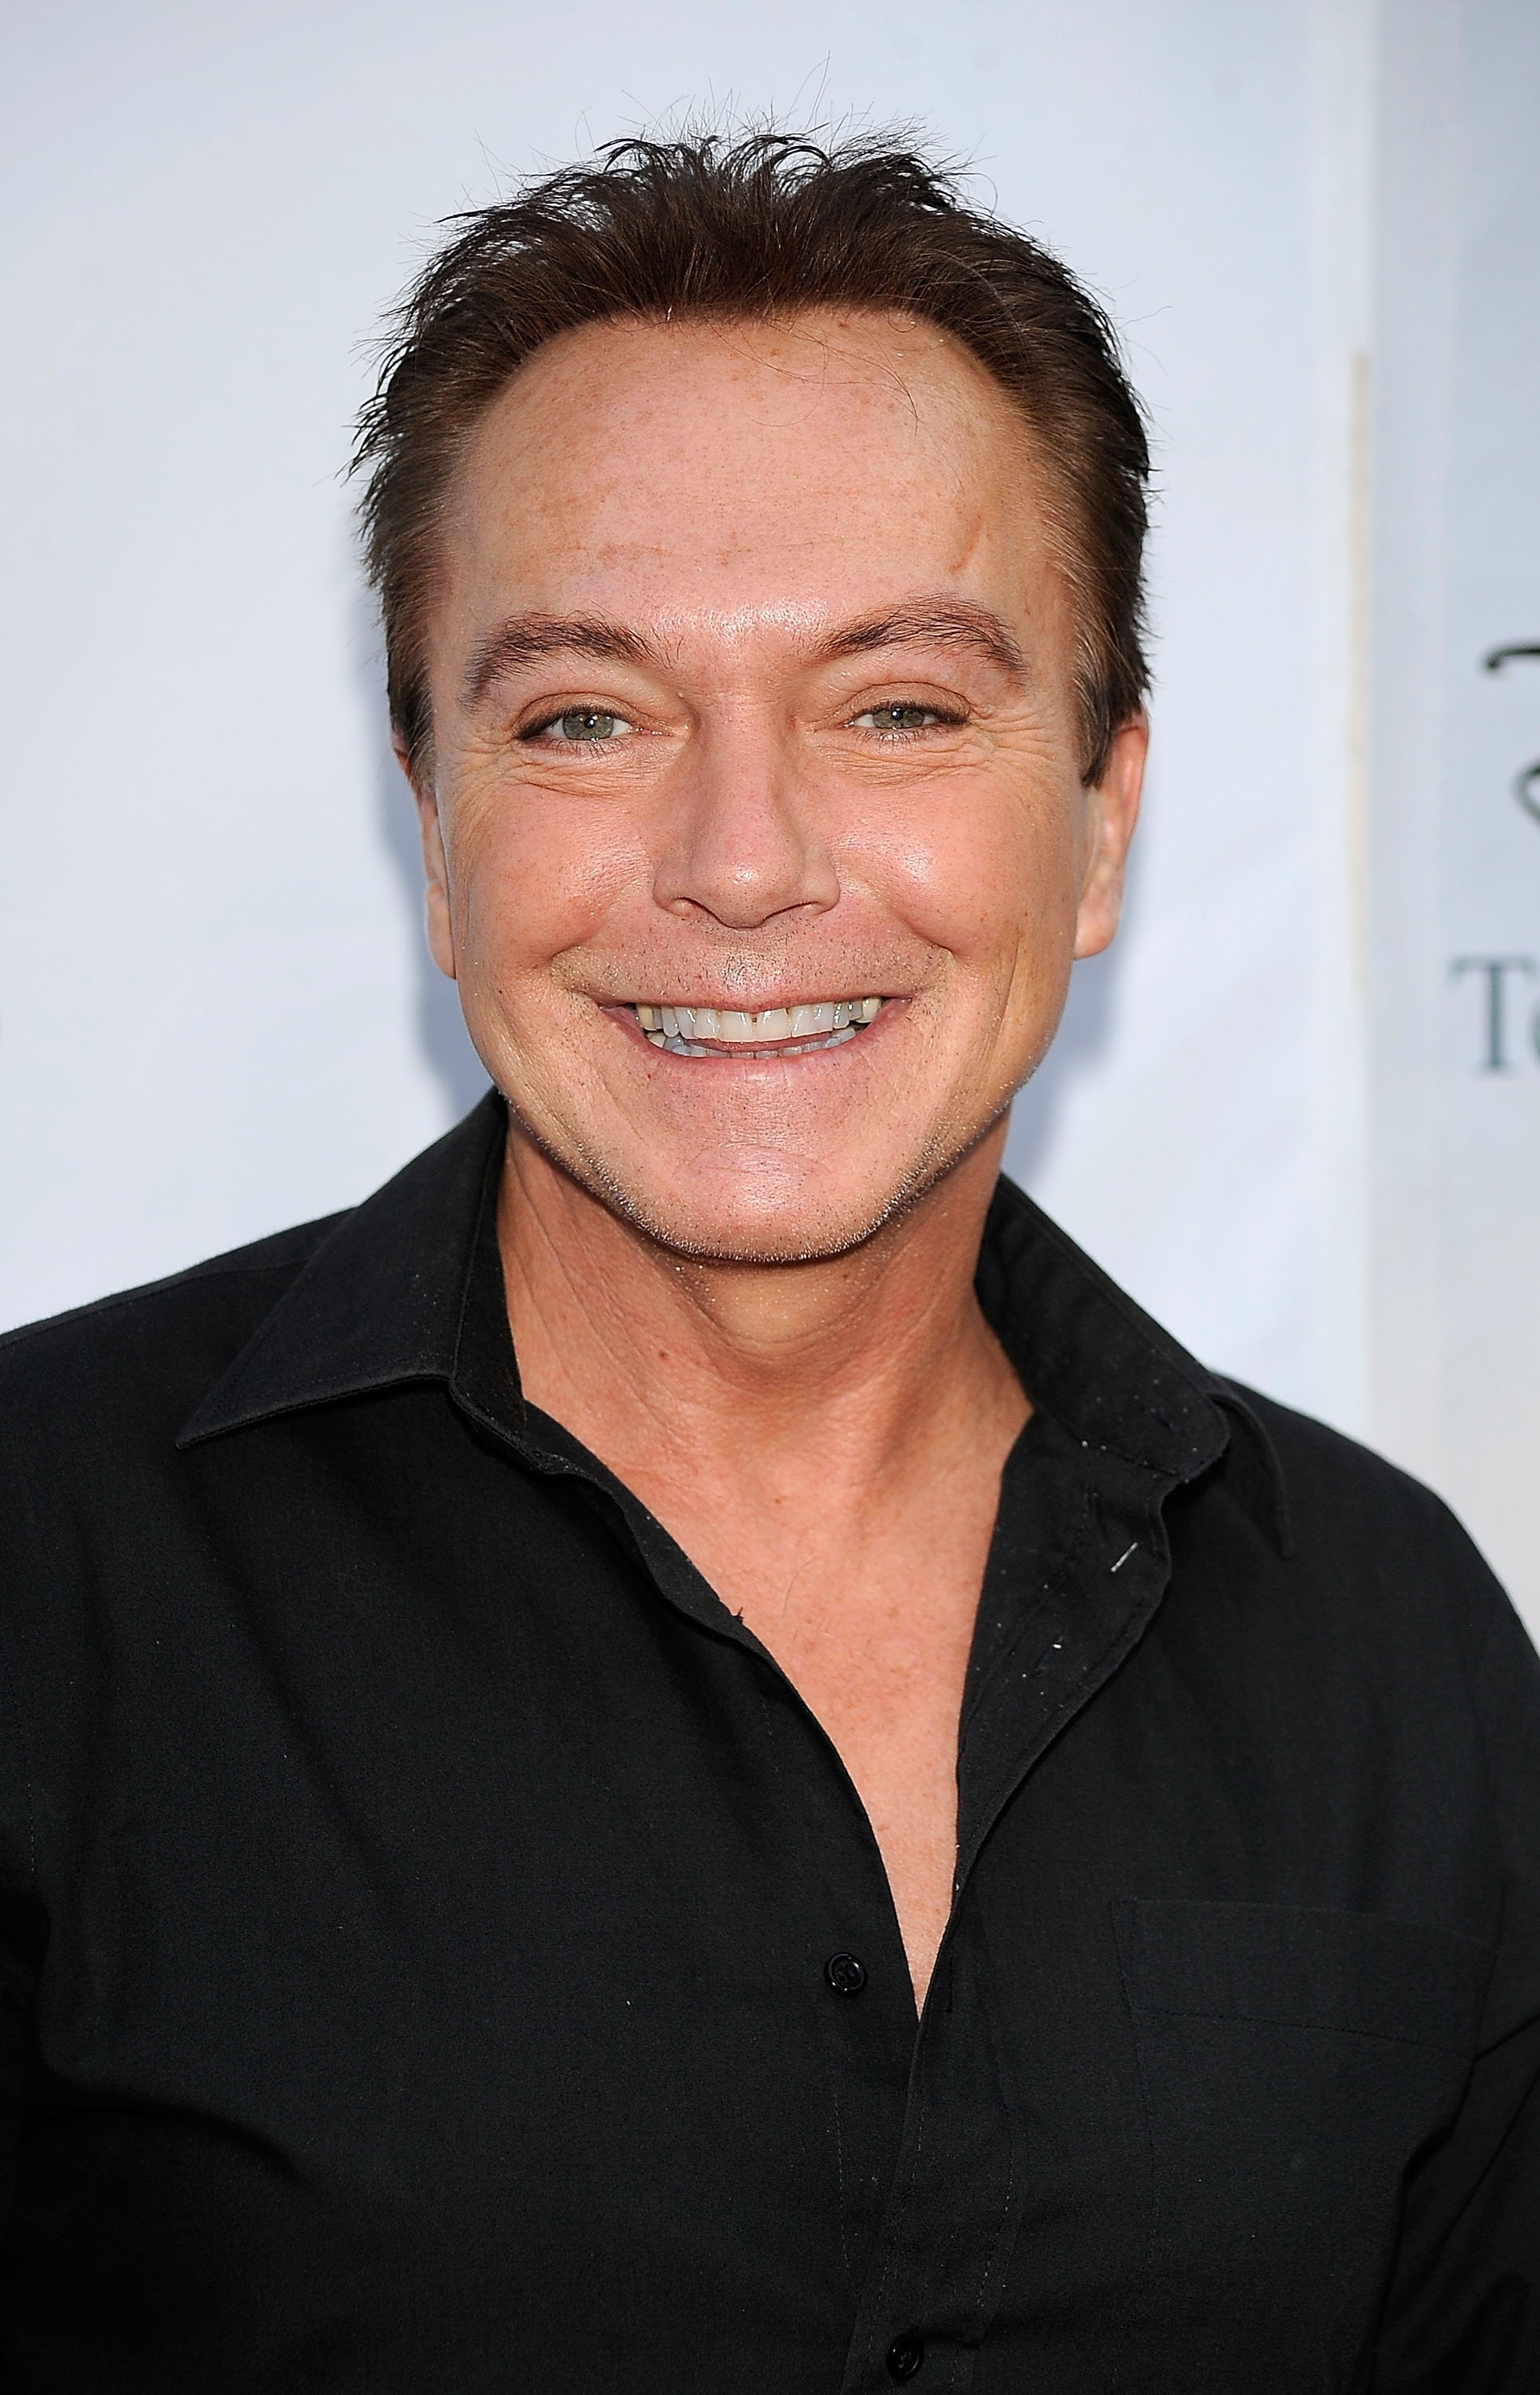 Actor David Cassidy arrives at the Disney-ABC Television Group Summer Press Tour Party at The Langham Hotel on August 8, 2009 in Pasadena, California. | Source: Getty Images